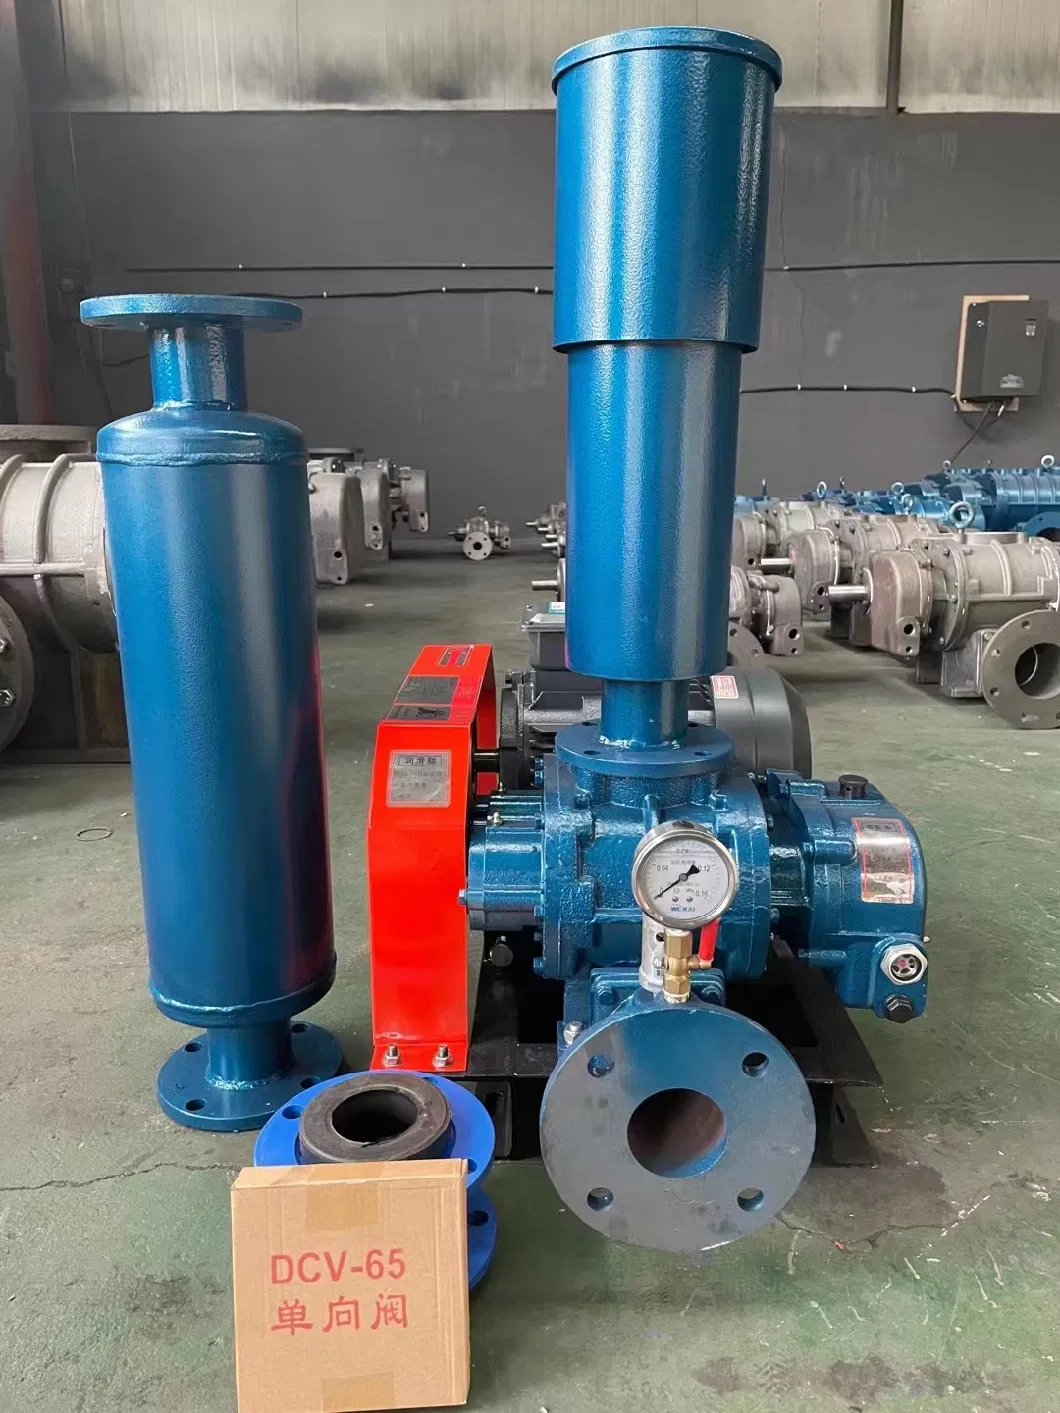 High Pressure Water-Cooled Three Lobes Roots Blower Pneumatic Conveying Equipment with Big Air Volume